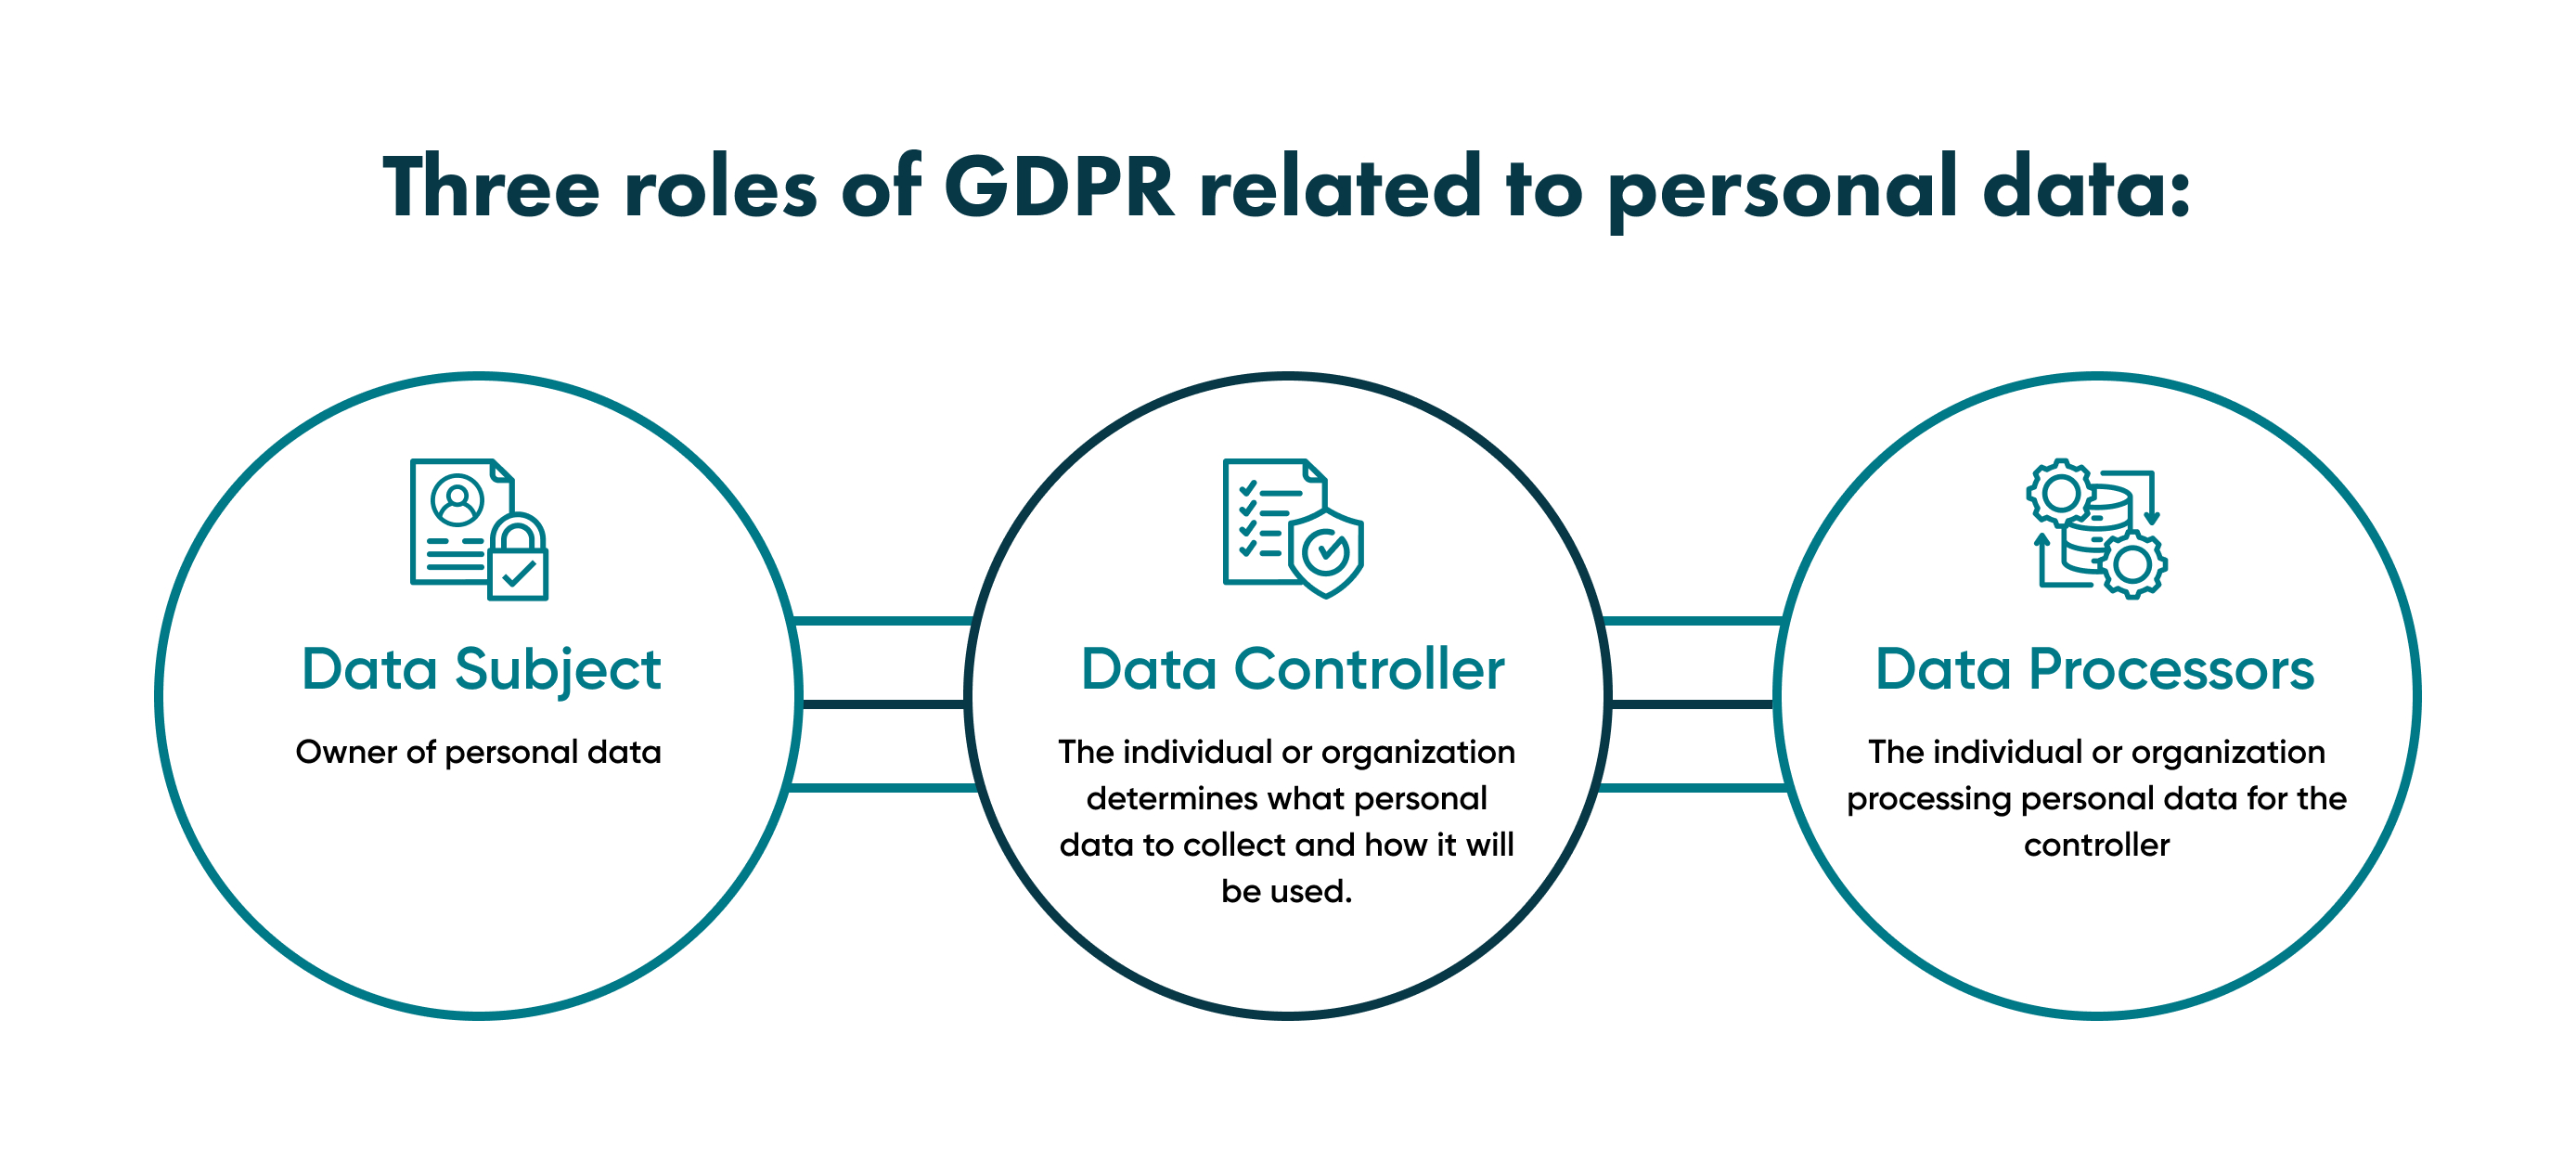 There are three roles in GDPR processes: the data subject, the data controller, and the data processors.